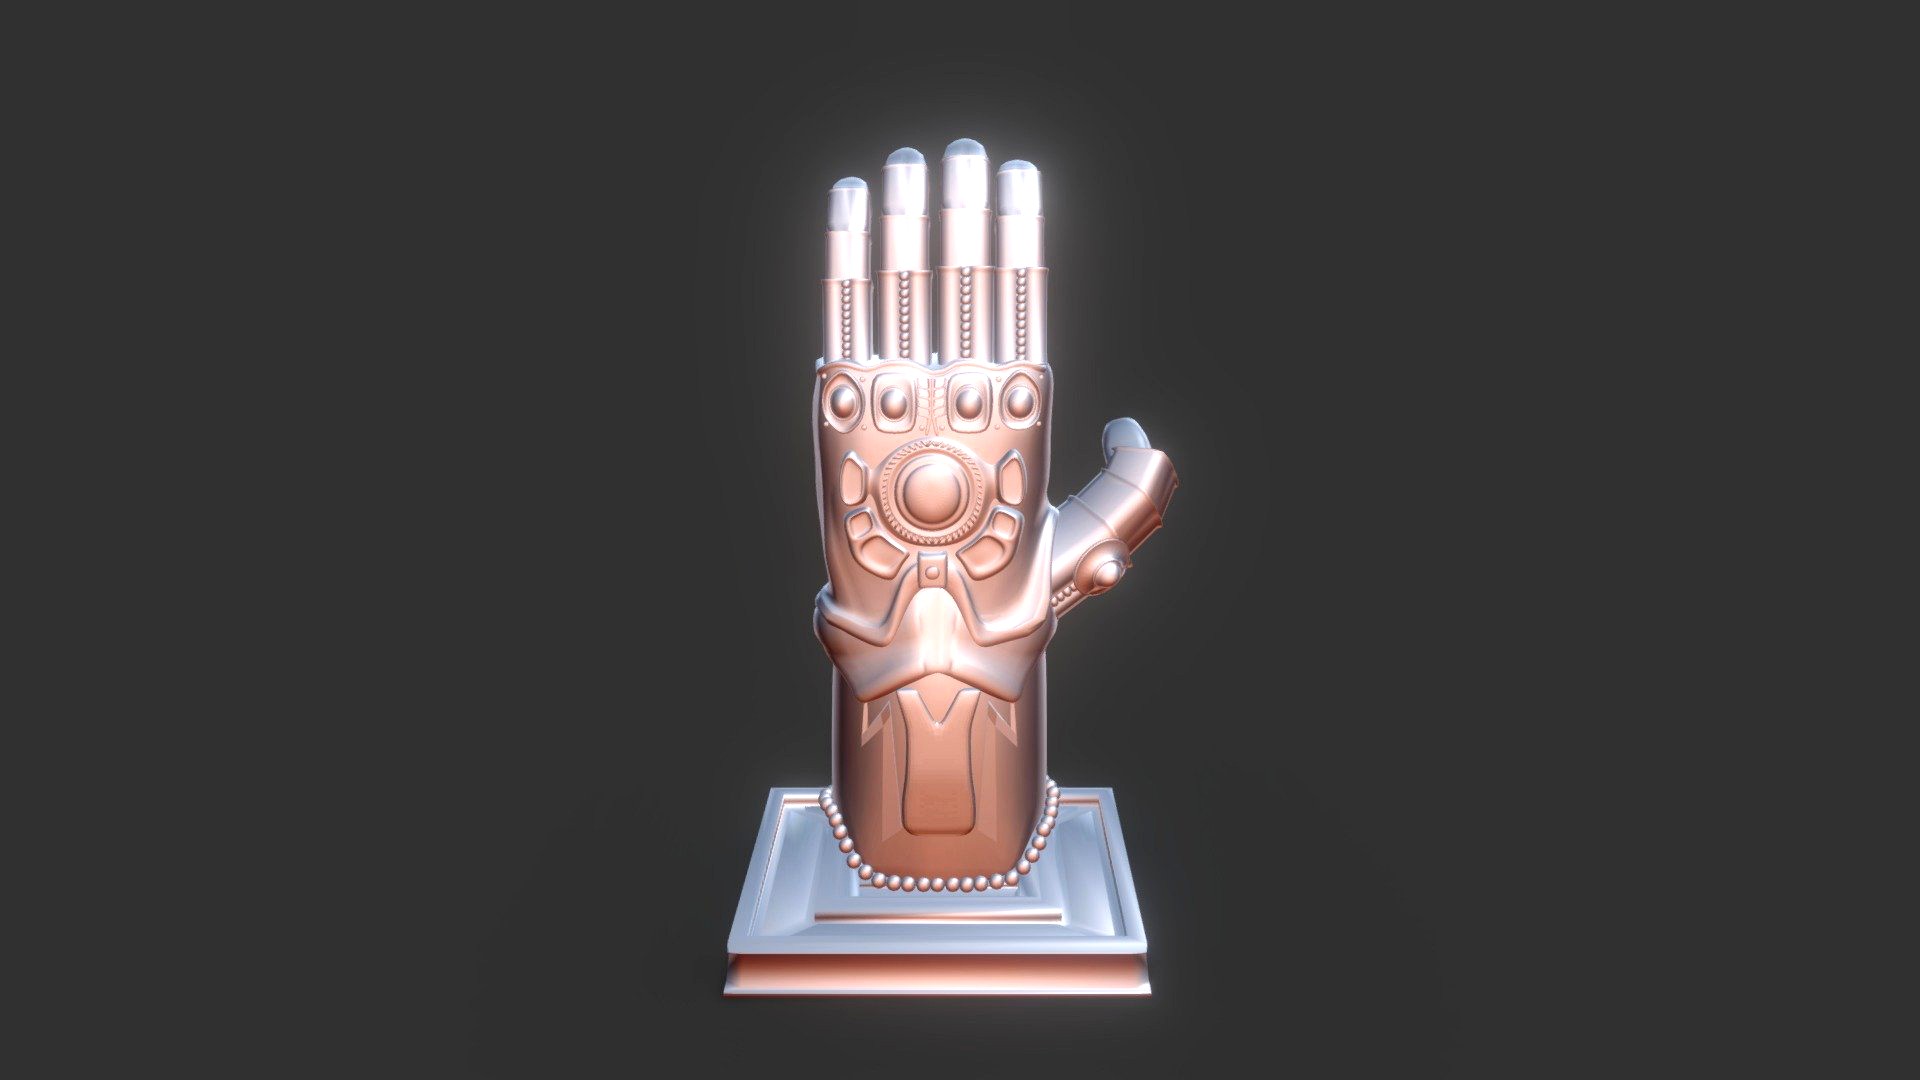 Thanos Infinity Gauntlet from Avengers Infinity